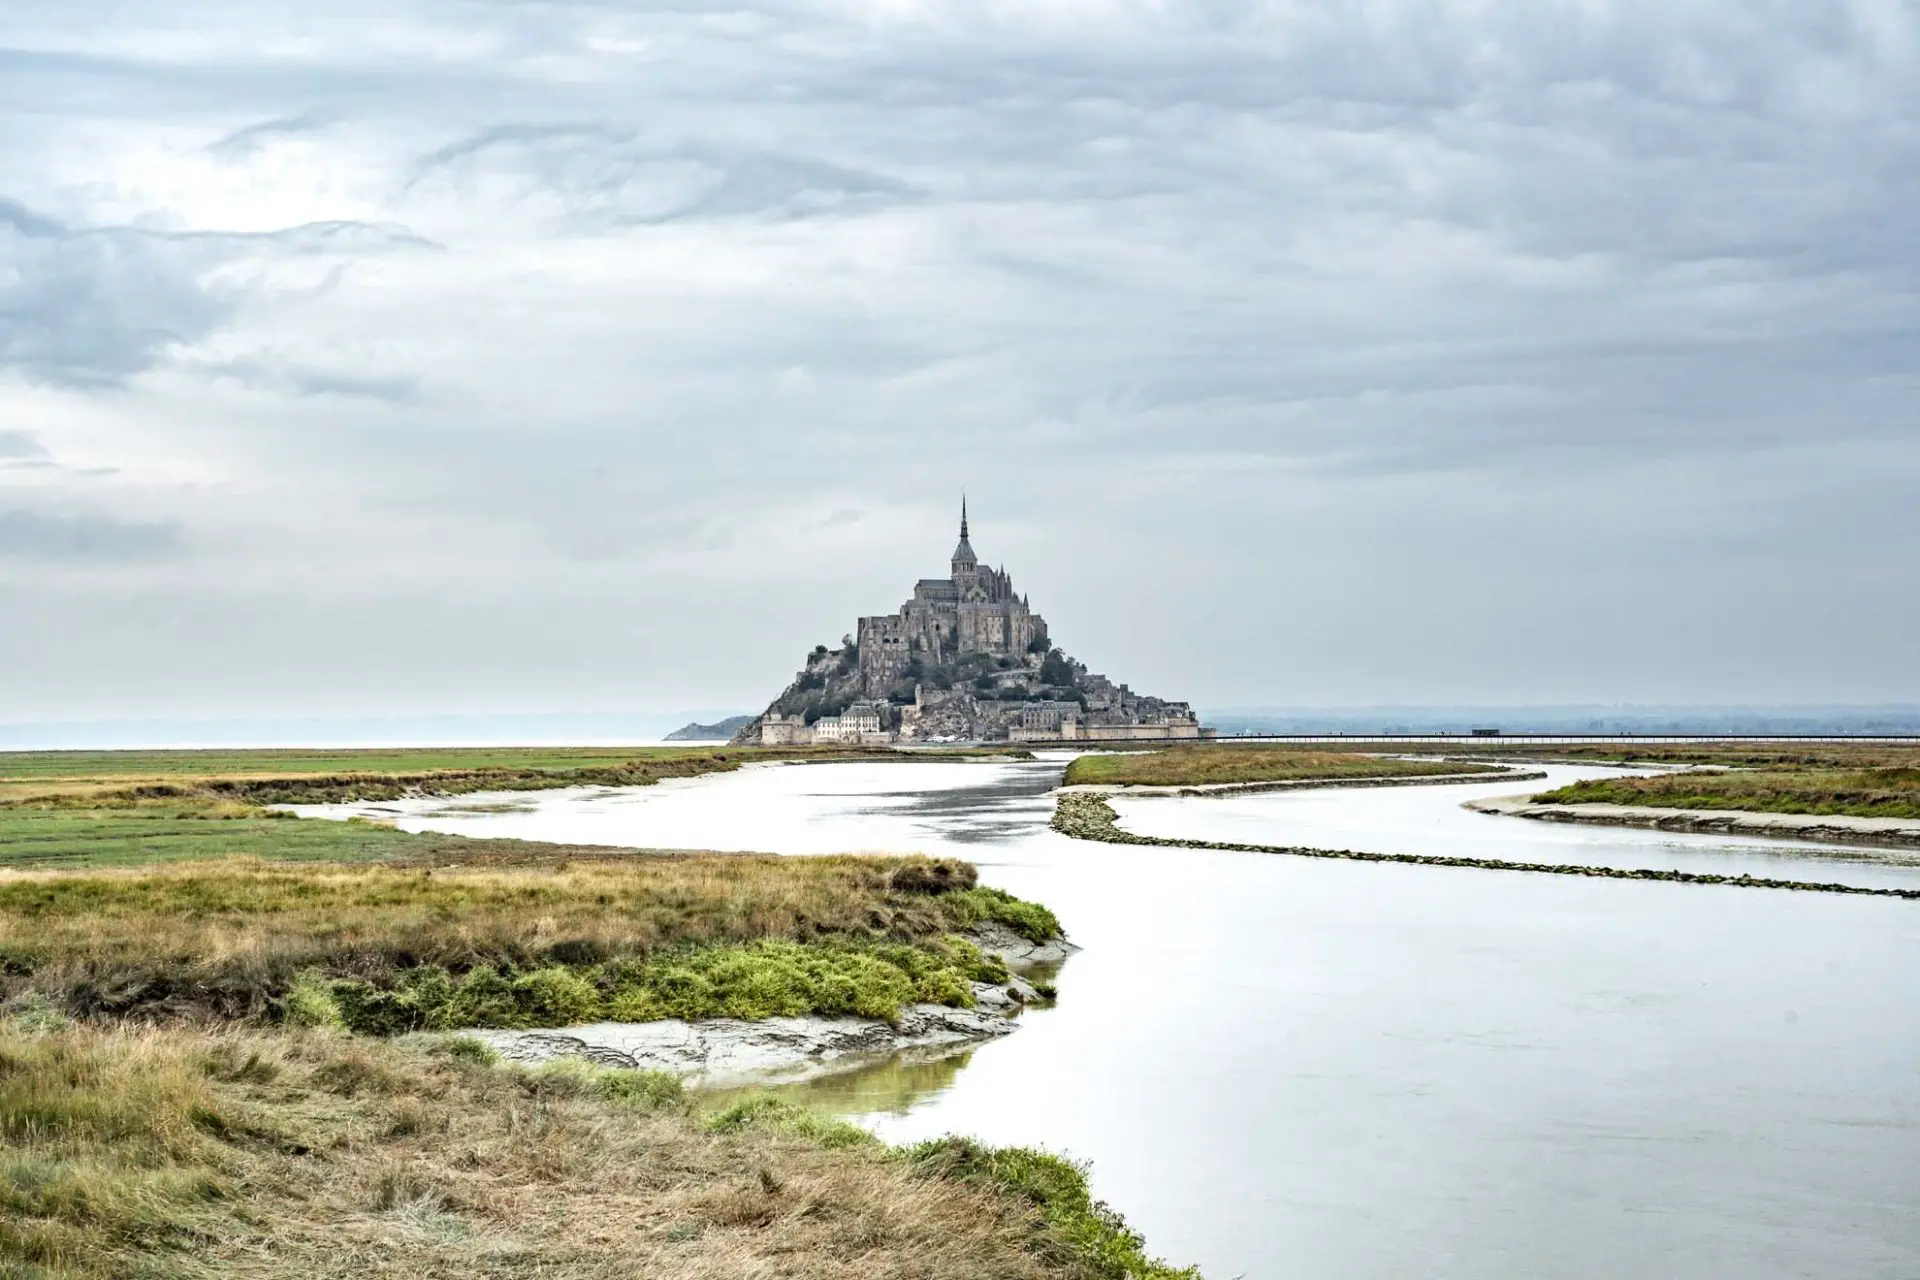 Mont St Michel on a grey, cloudy day with the Couesnon River in the foreground